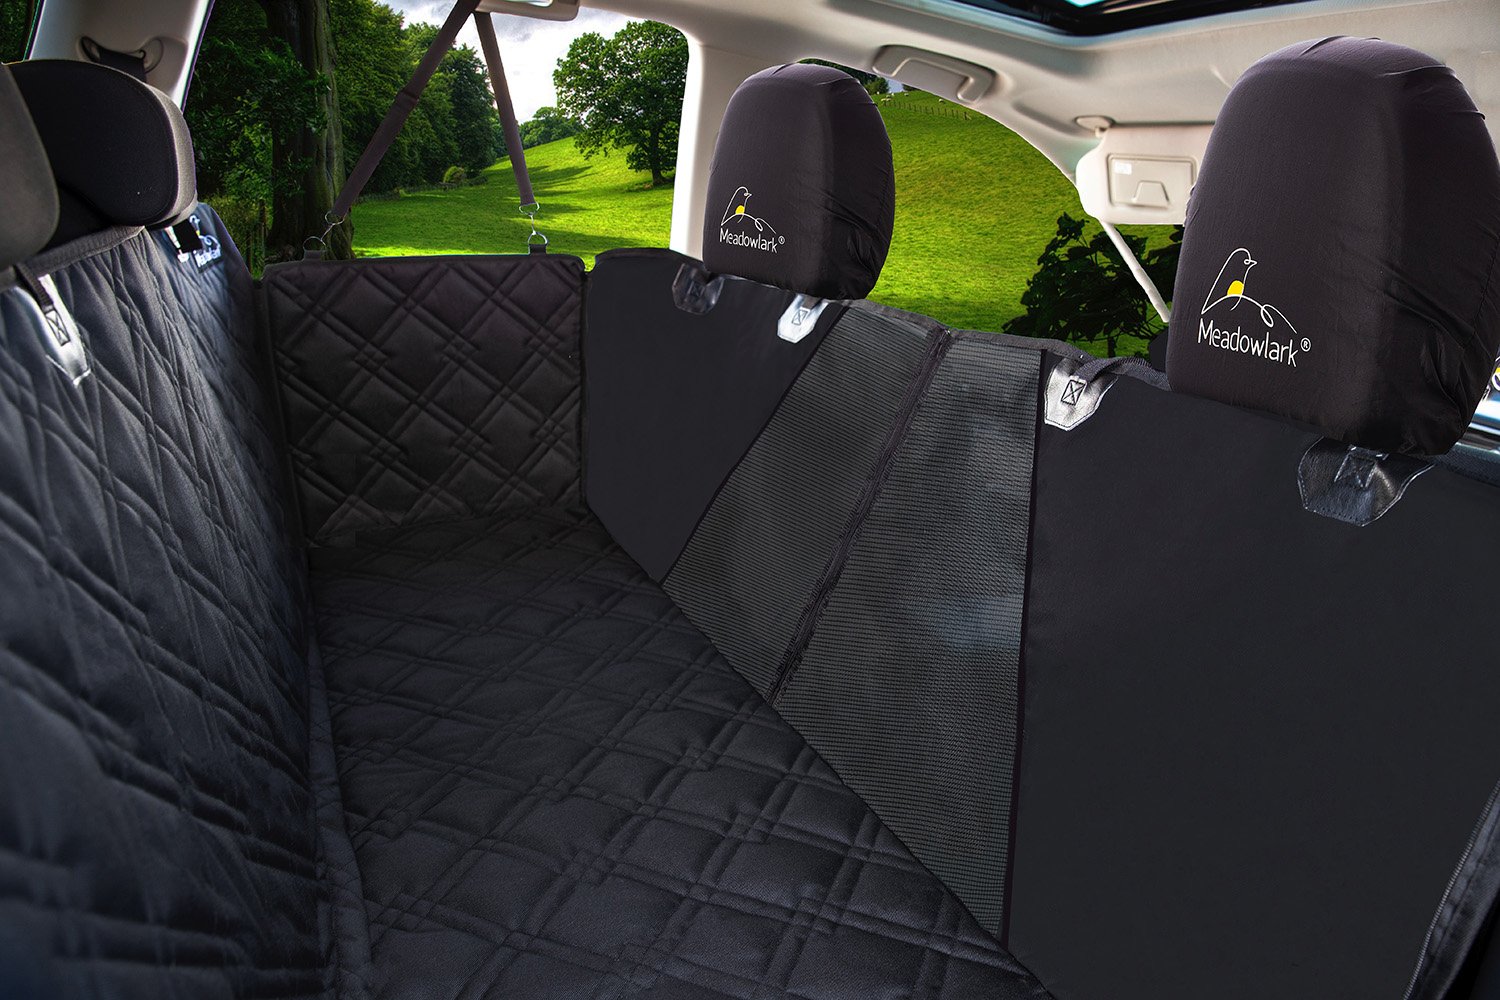 Bench seat cover for Backseat without hammock - MEADOWLARK US LLC